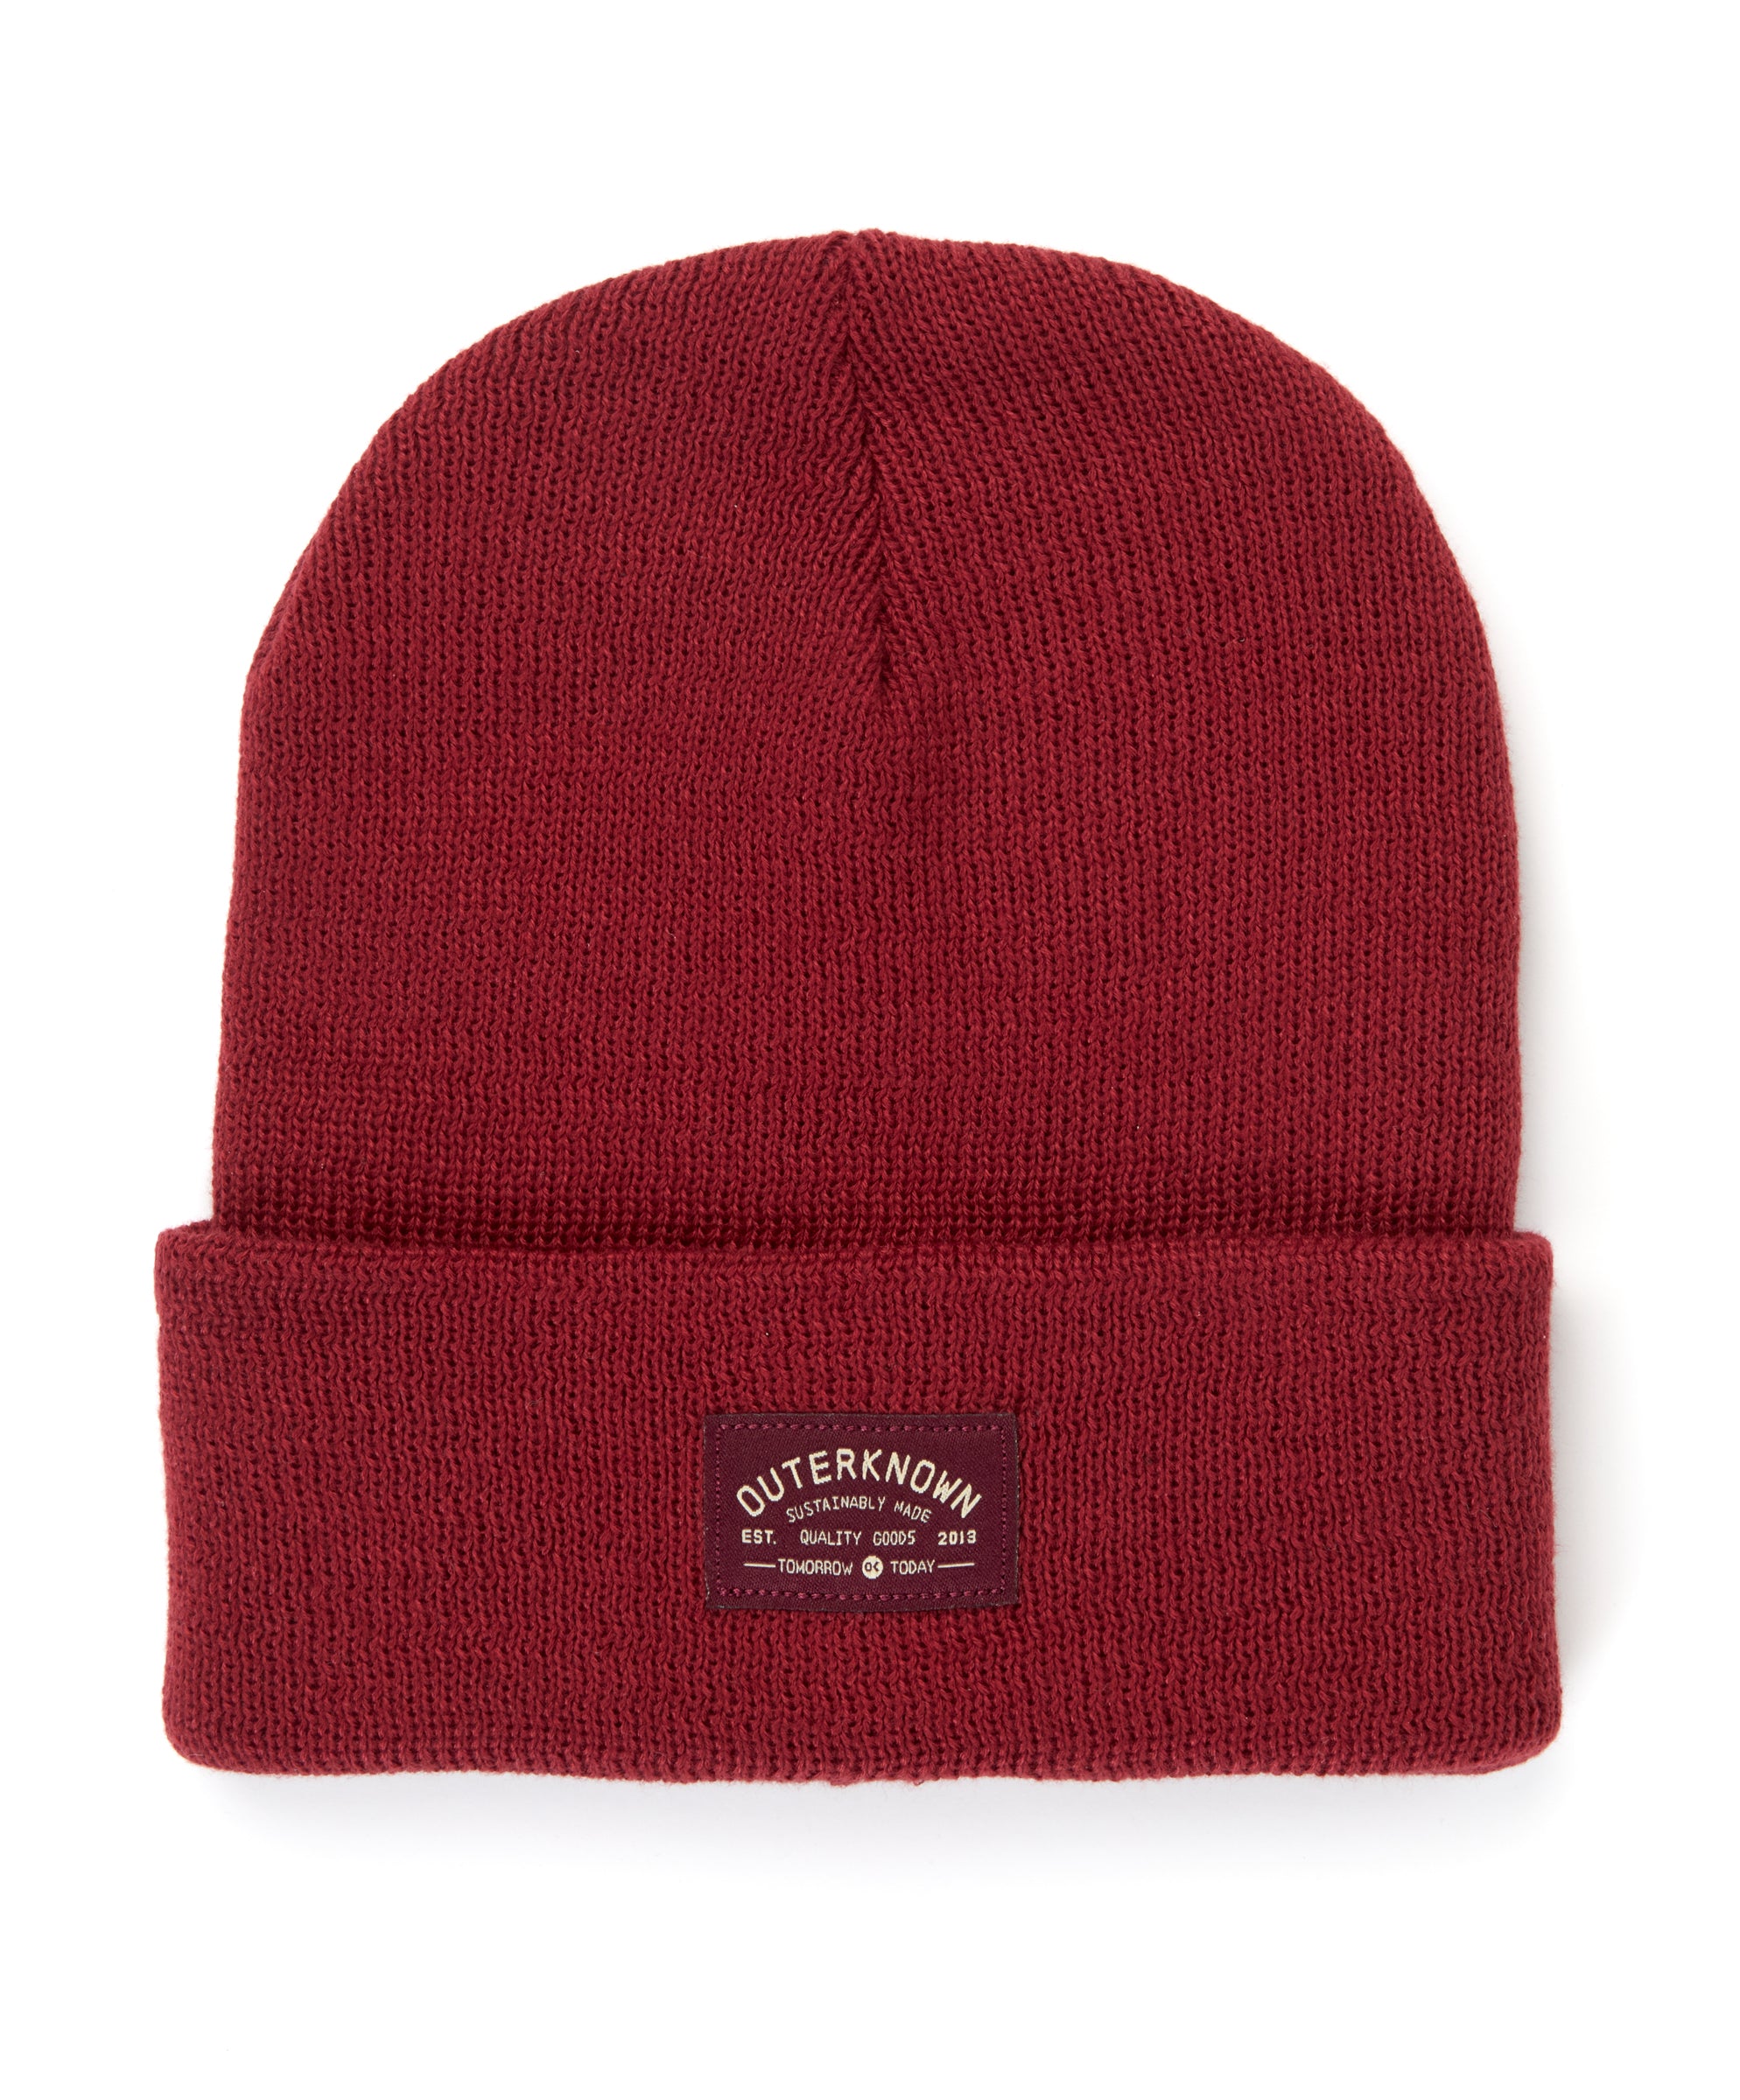 Industrial Outerknown Tall Beanie, Men's Accessories